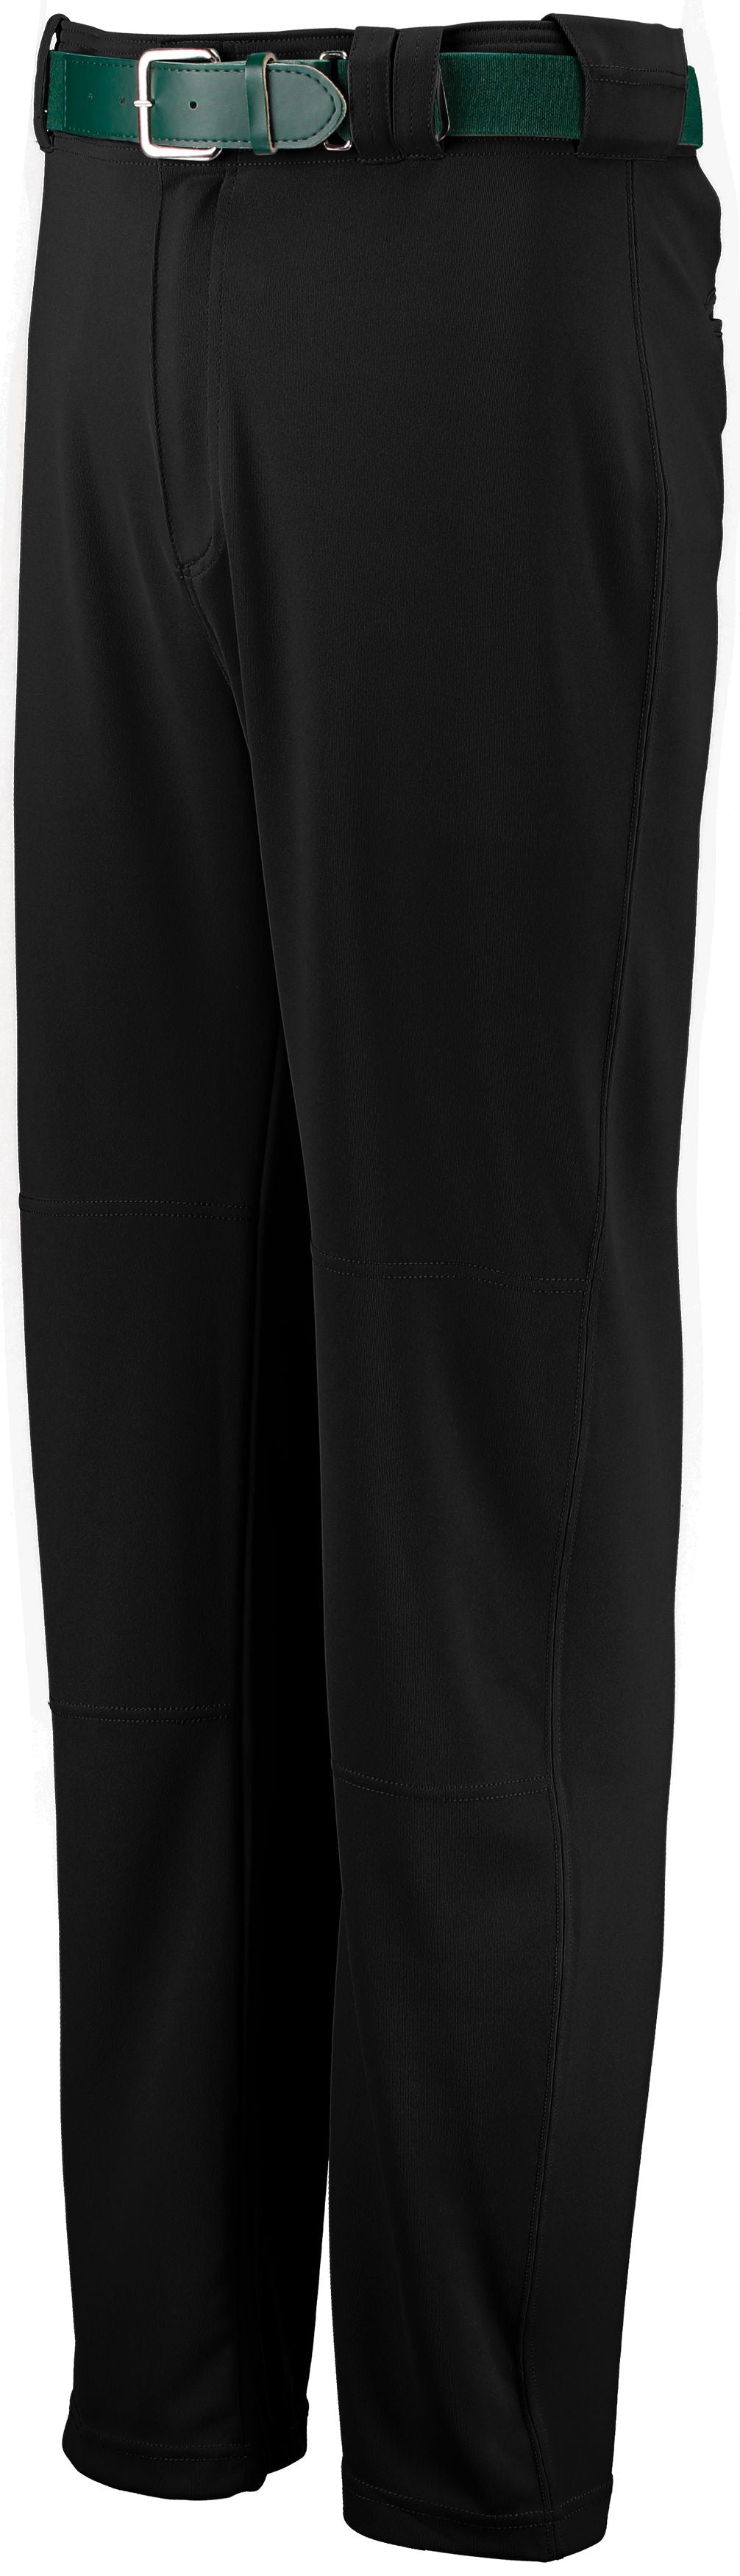 Russell Athletic Youth Boot Cut Game Pant in Black  -Part of the Youth, Youth-Pants, Pants, Baseball, Russell-Athletic-Products, All-Sports, All-Sports-1 product lines at KanaleyCreations.com